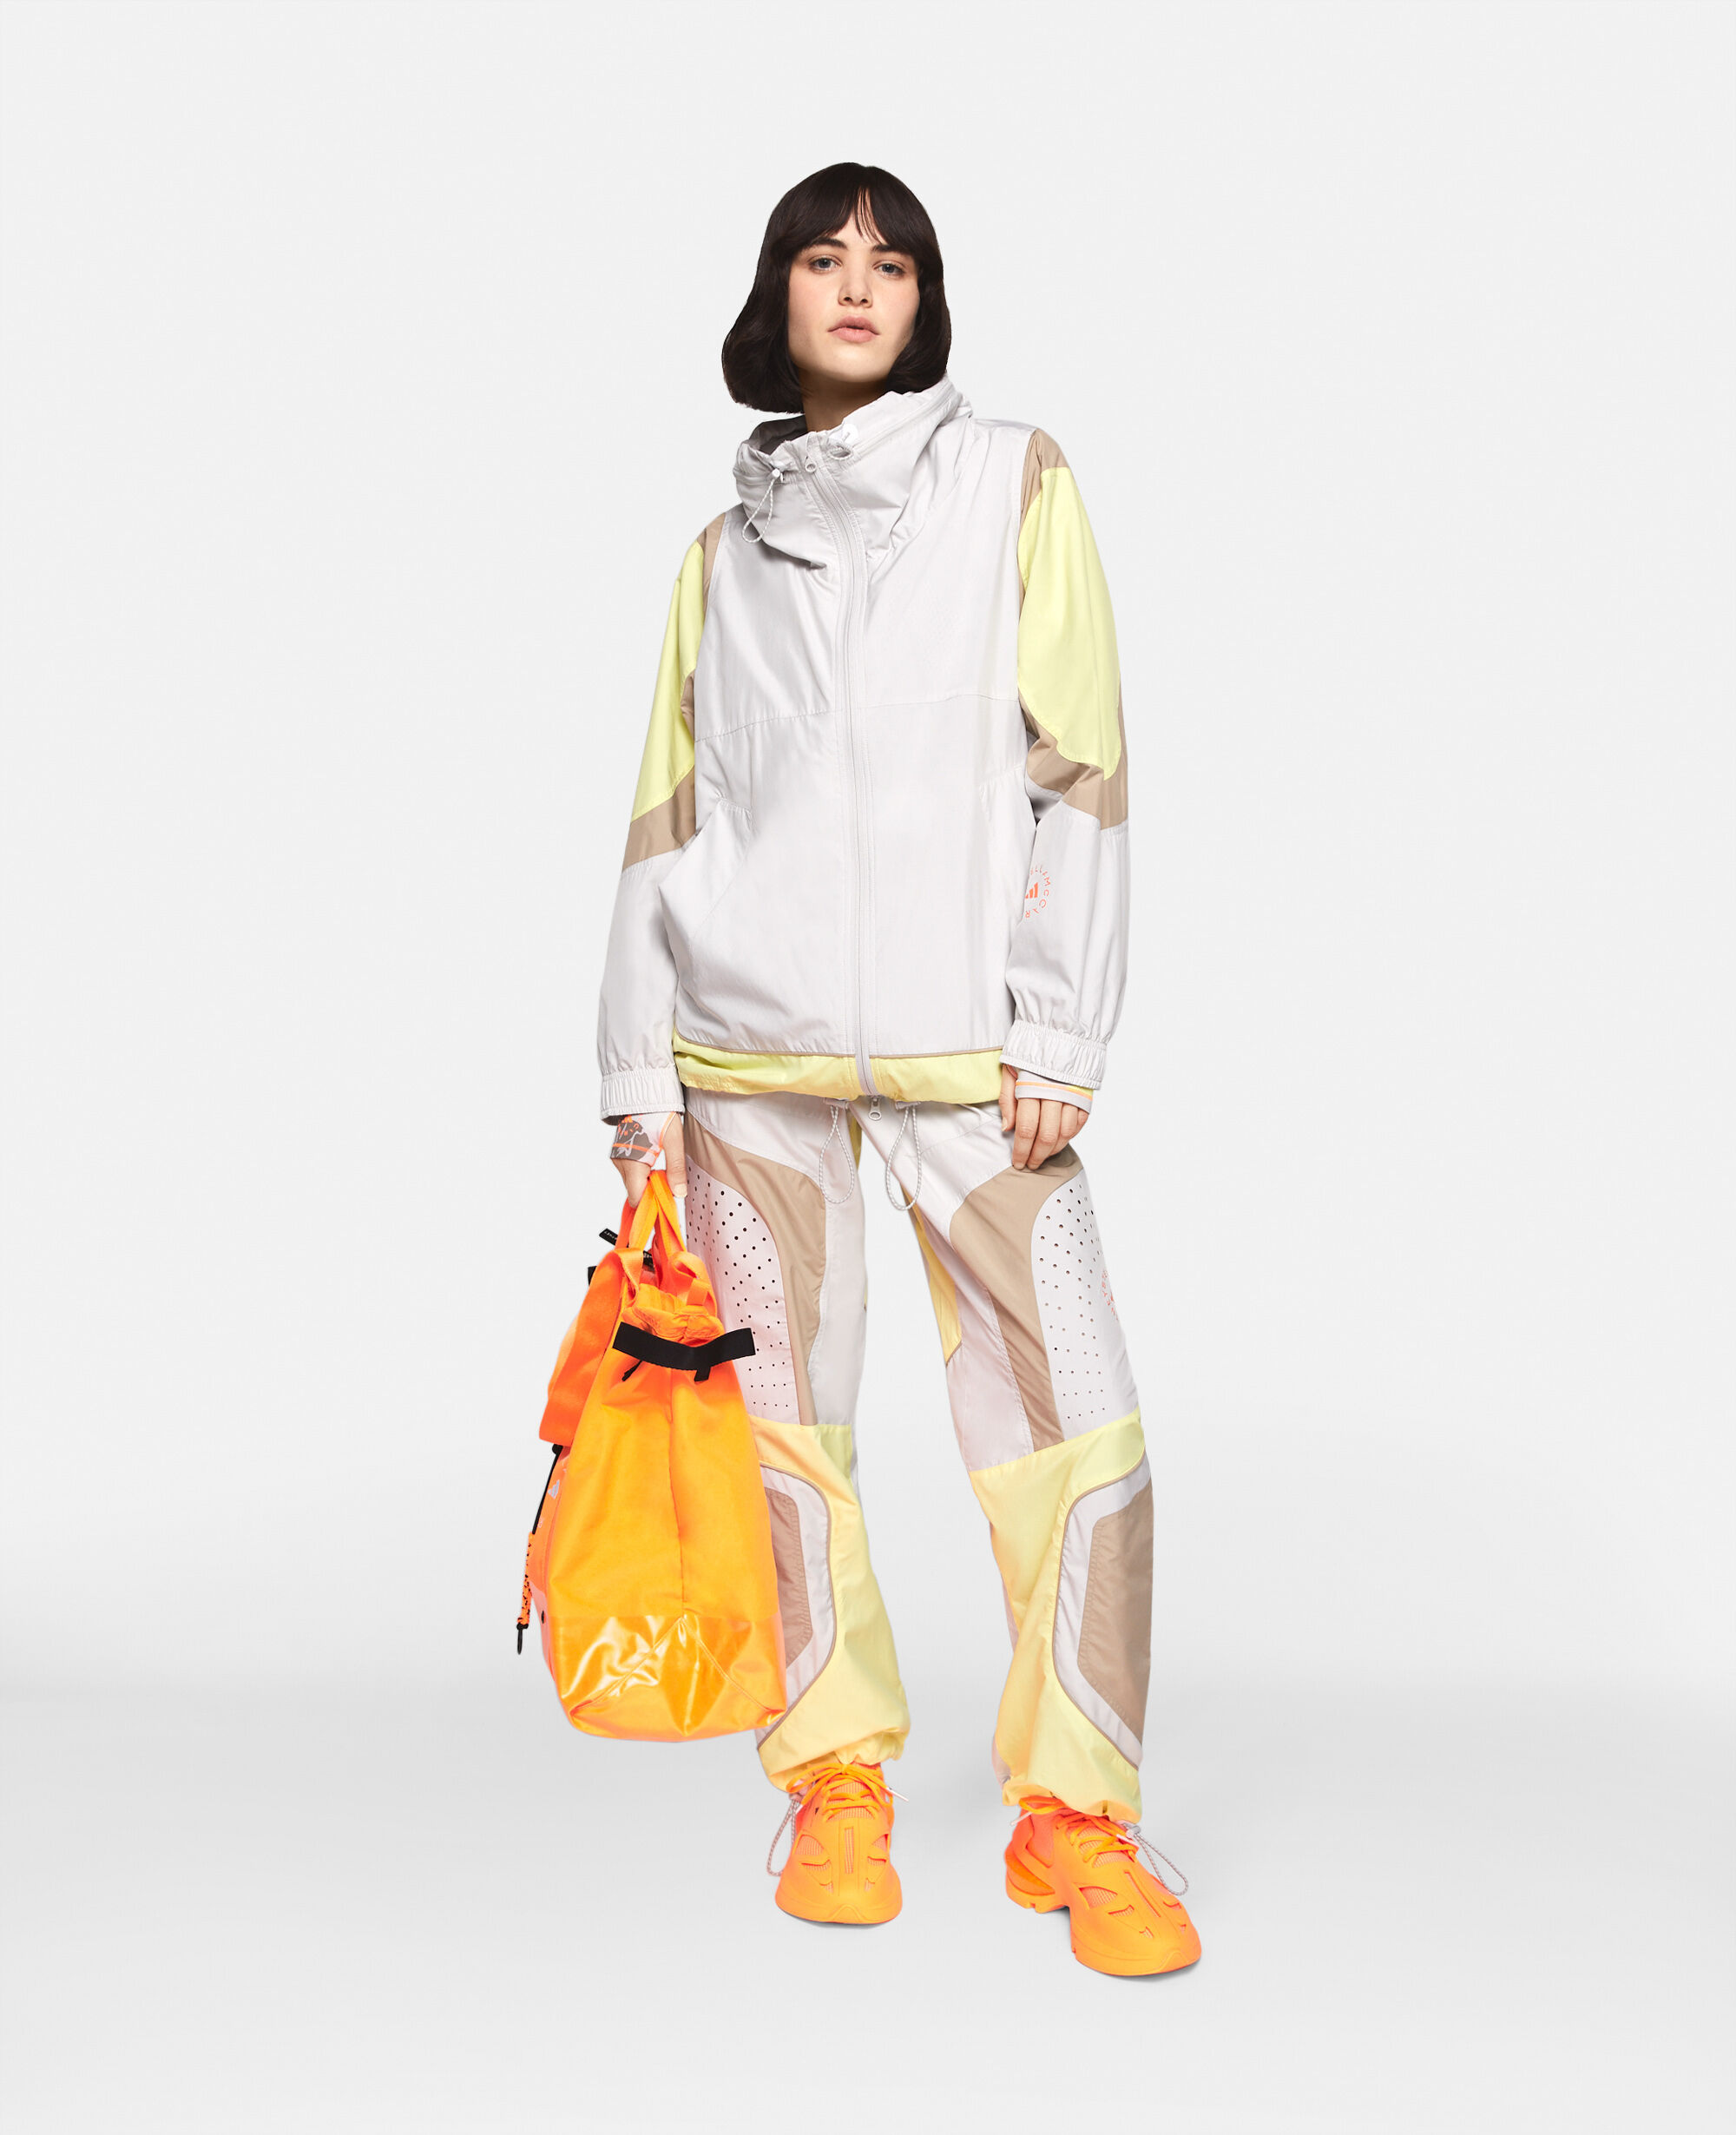 Women's Sports Collection | Adidas By Stella McCartney LV